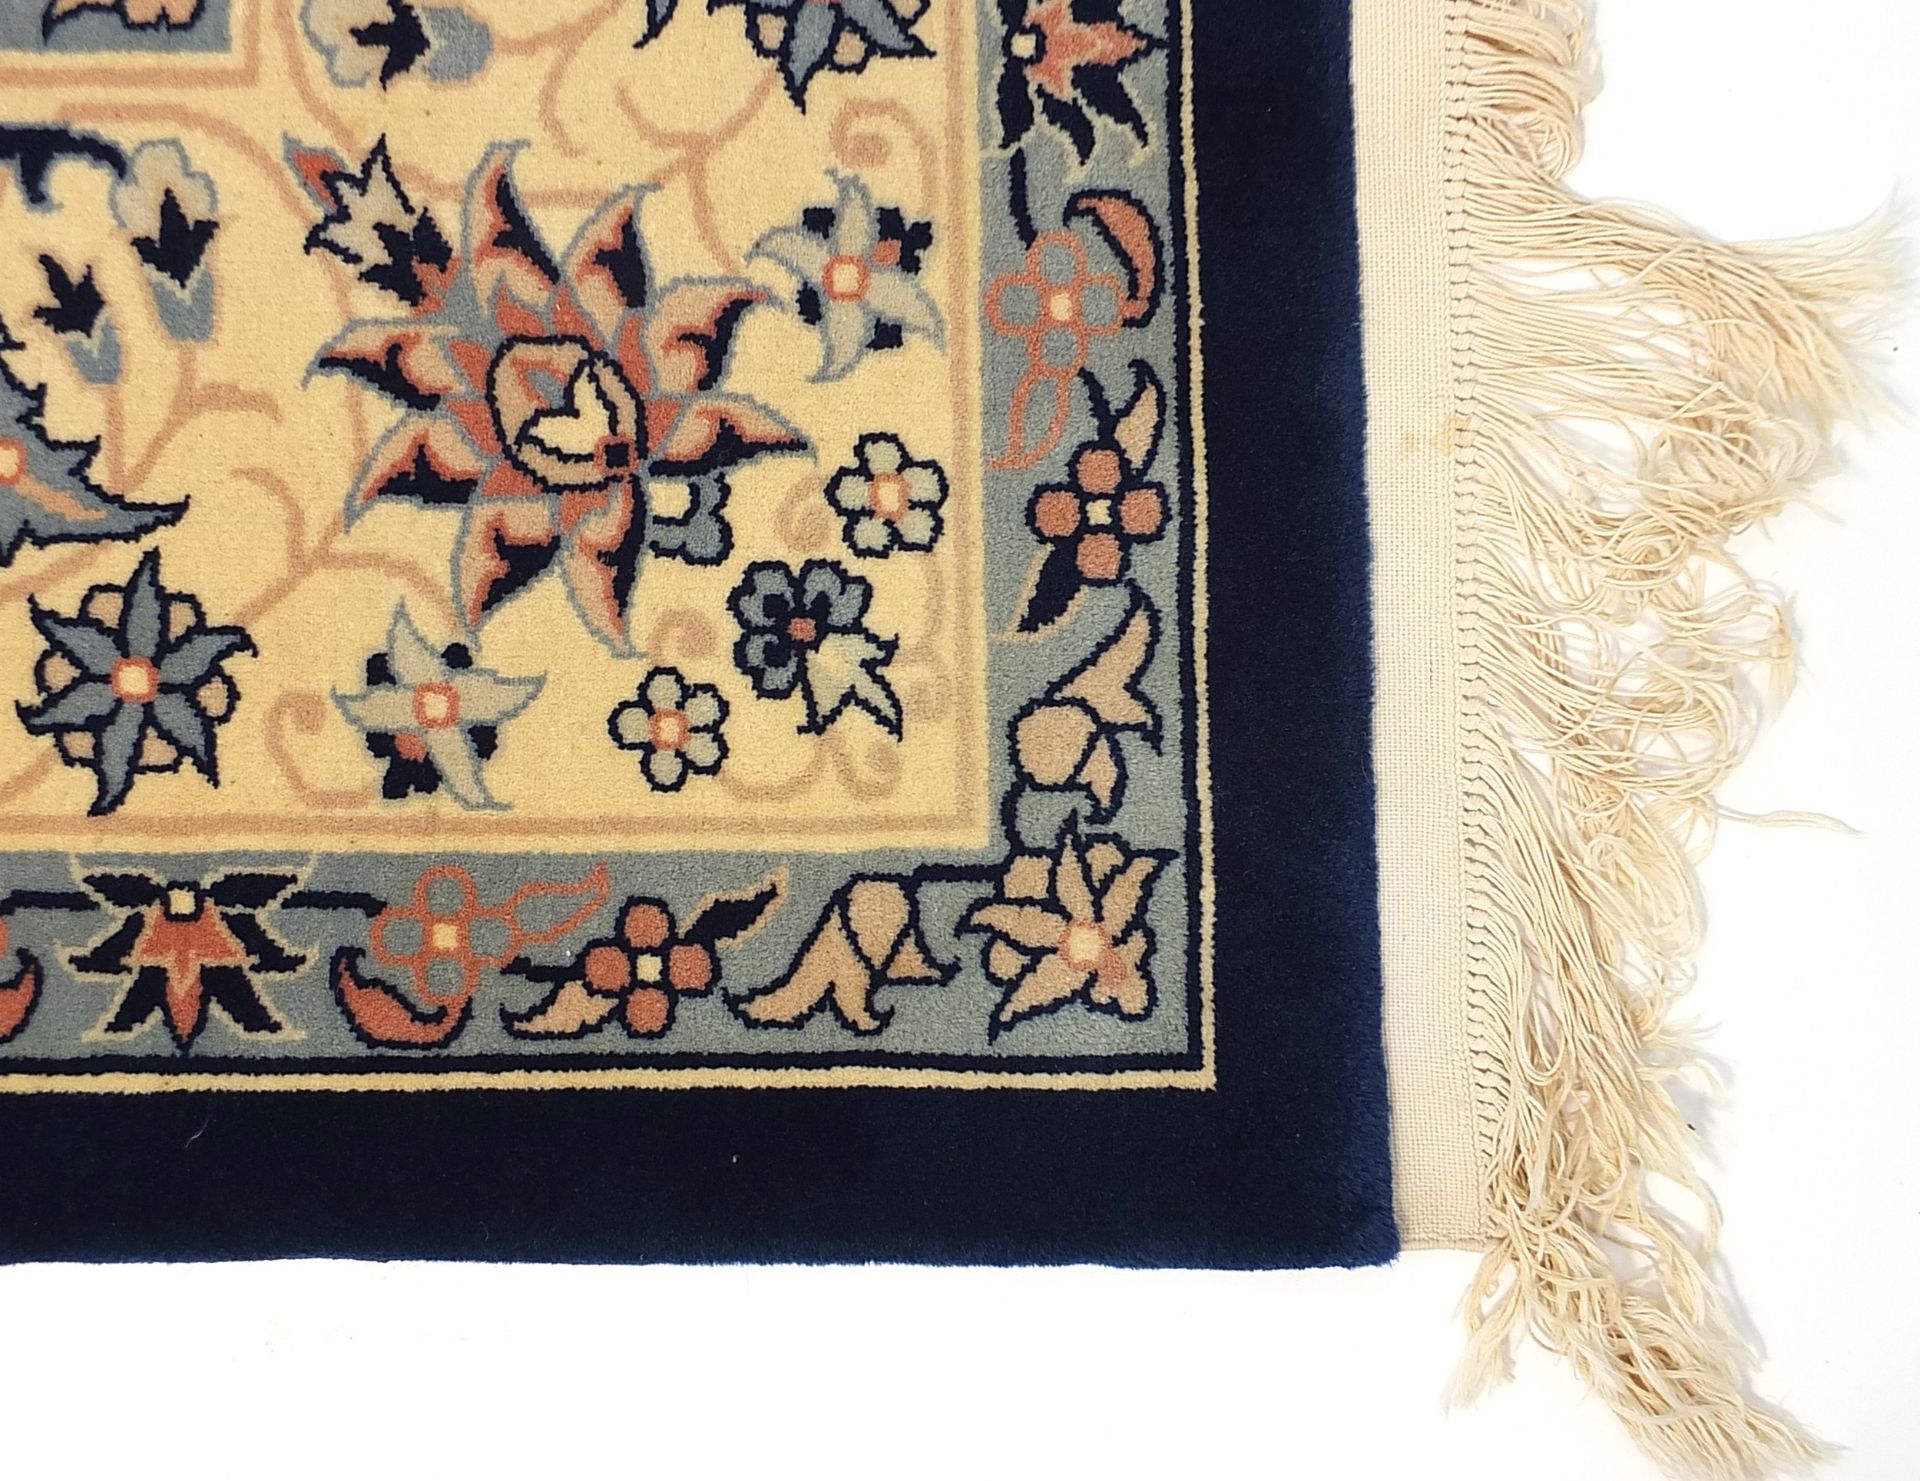 Rectangular Persian blue and cream ground carpet having an all over floral design, 360cm x 260cm - Image 2 of 6